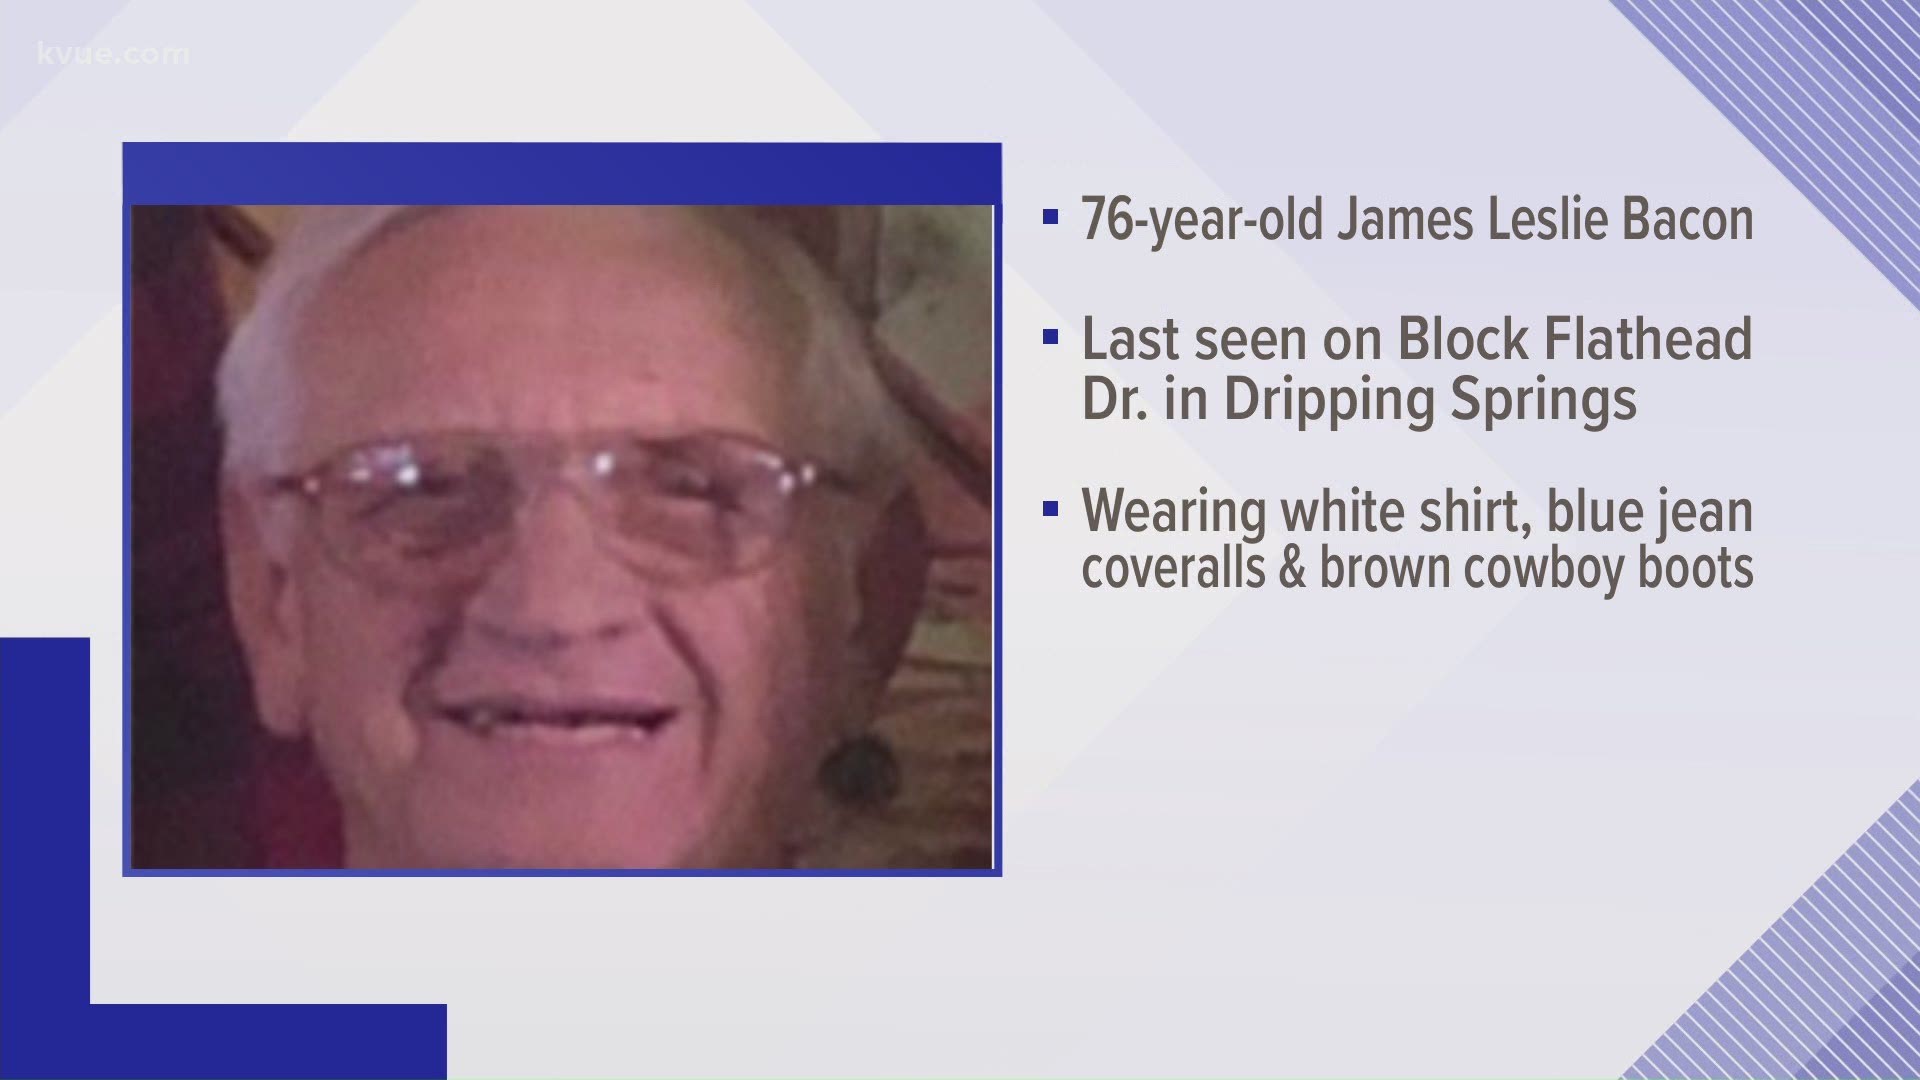 James Leslie Bacon, 76, has cognitive issues, the Hays County Sheriff's Office said.